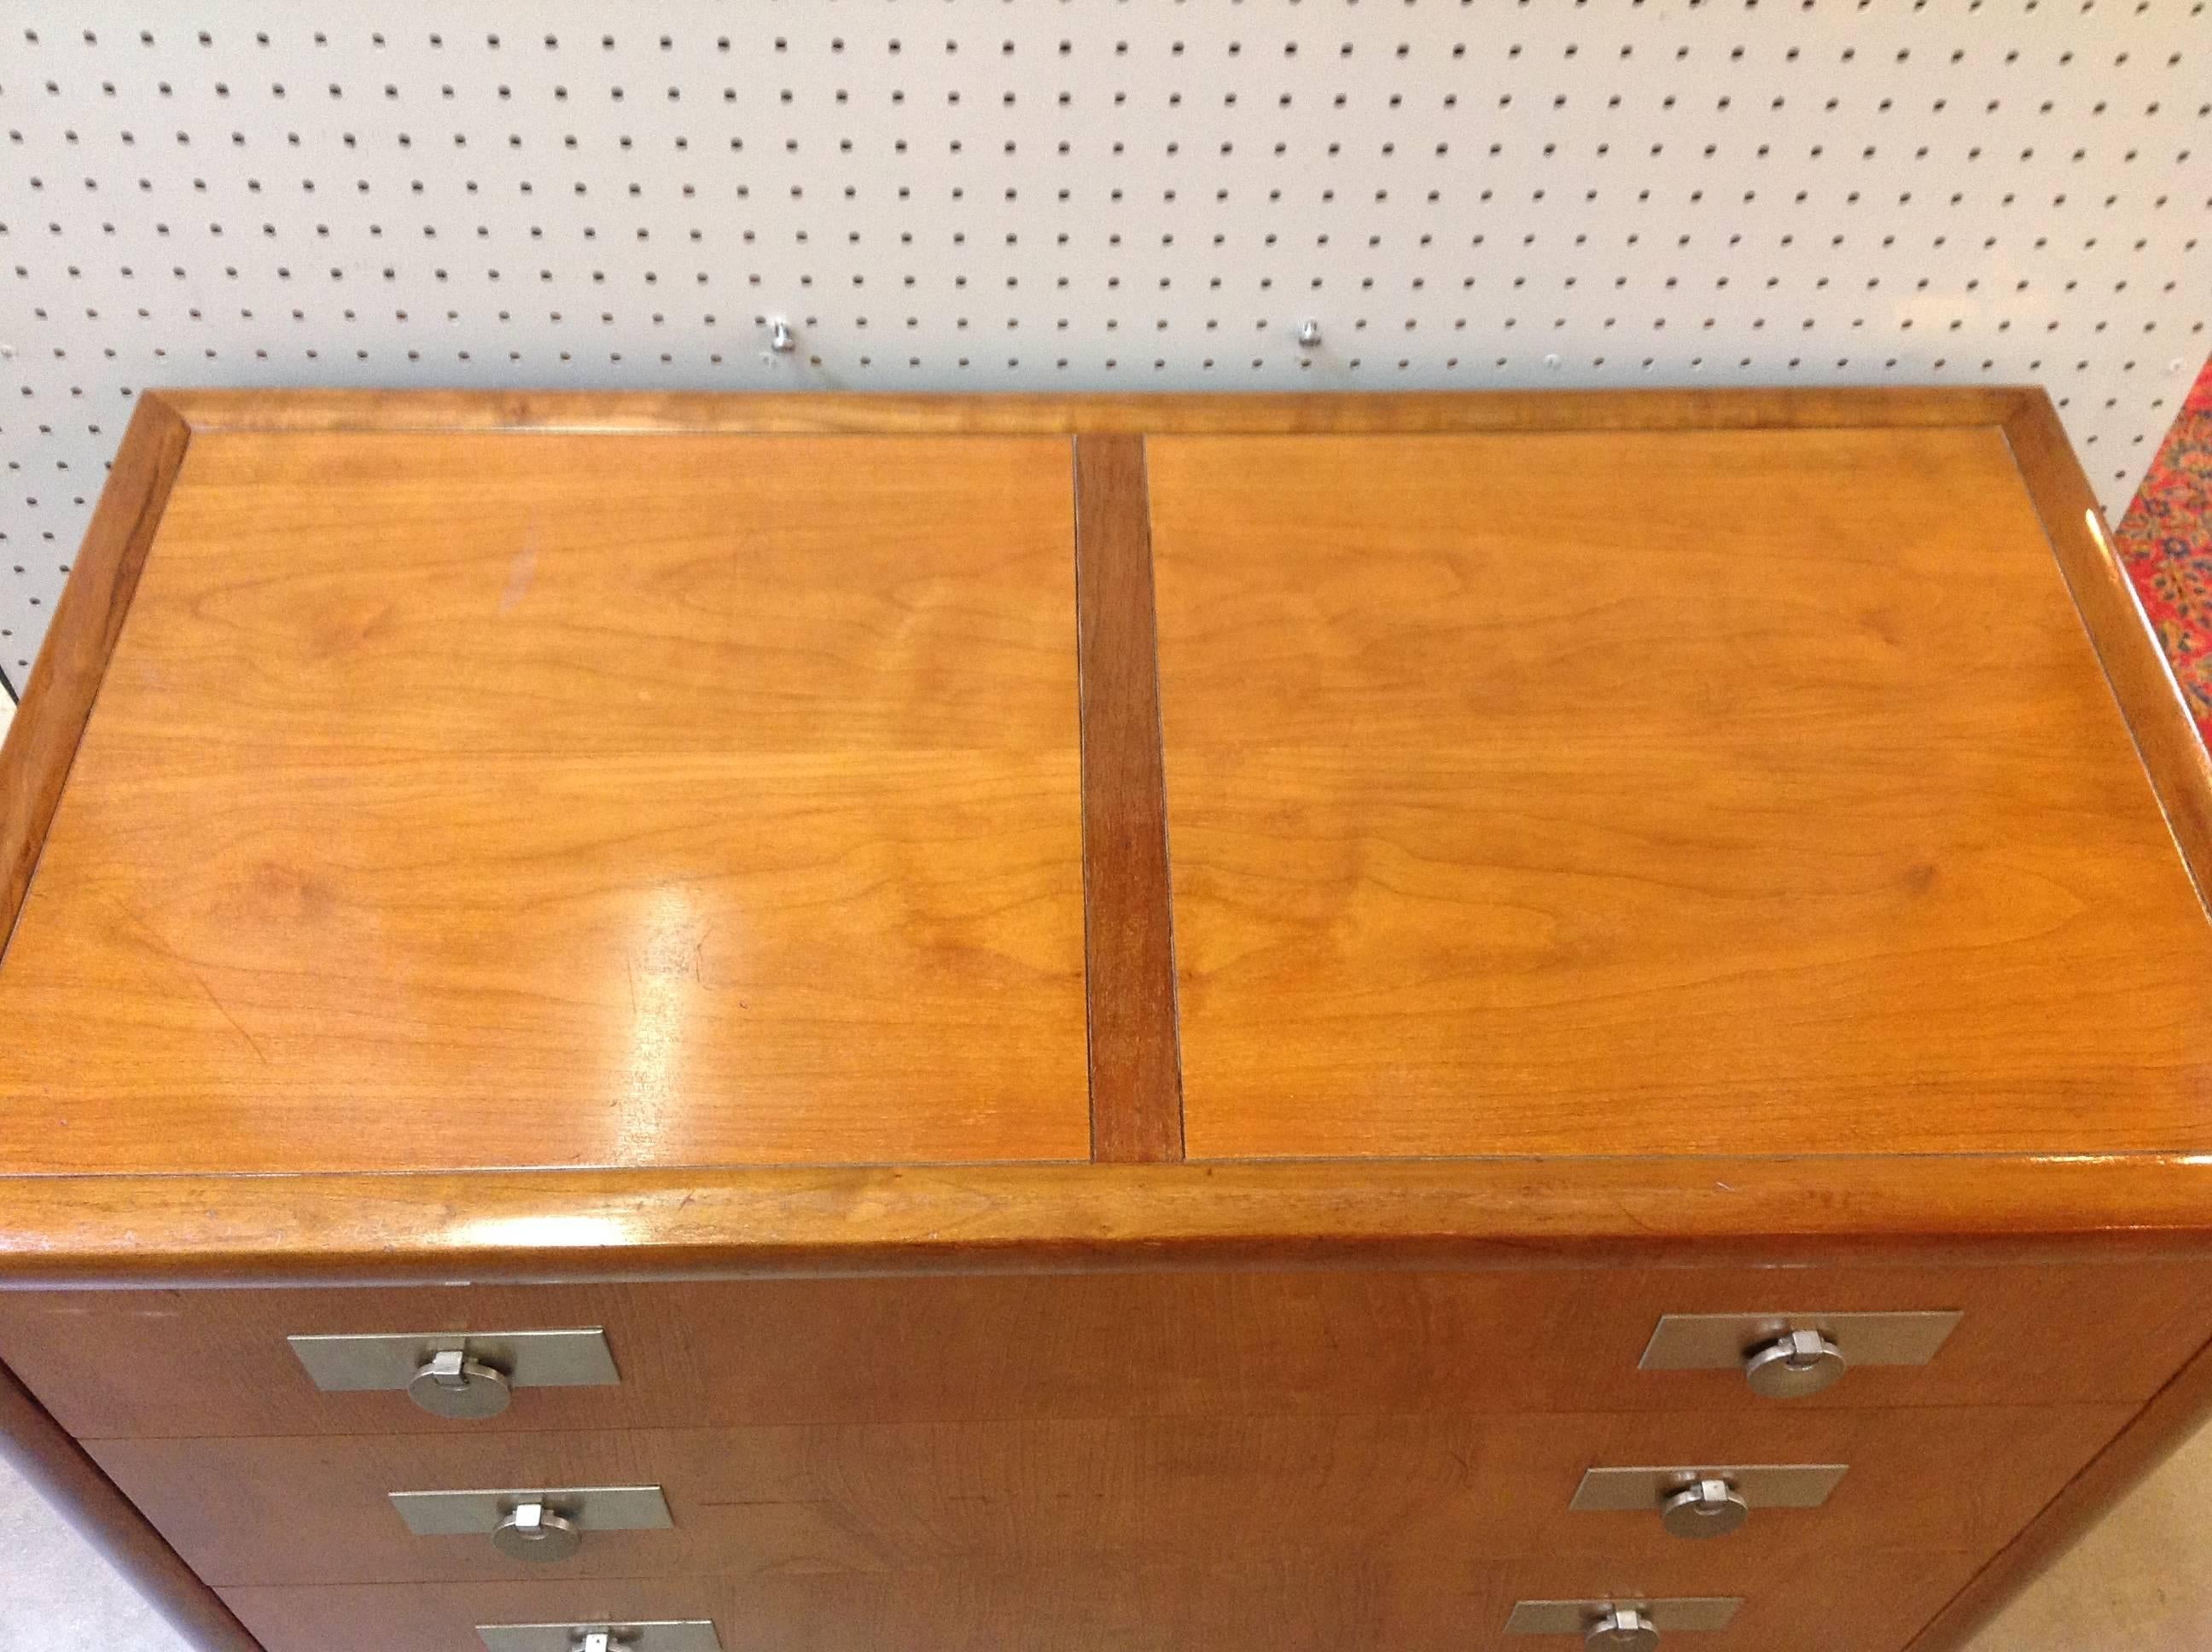 These chests are in great condition and have cool nickel hardware. They are originally from a high-end furniture store that was on the northshore of Chicago.